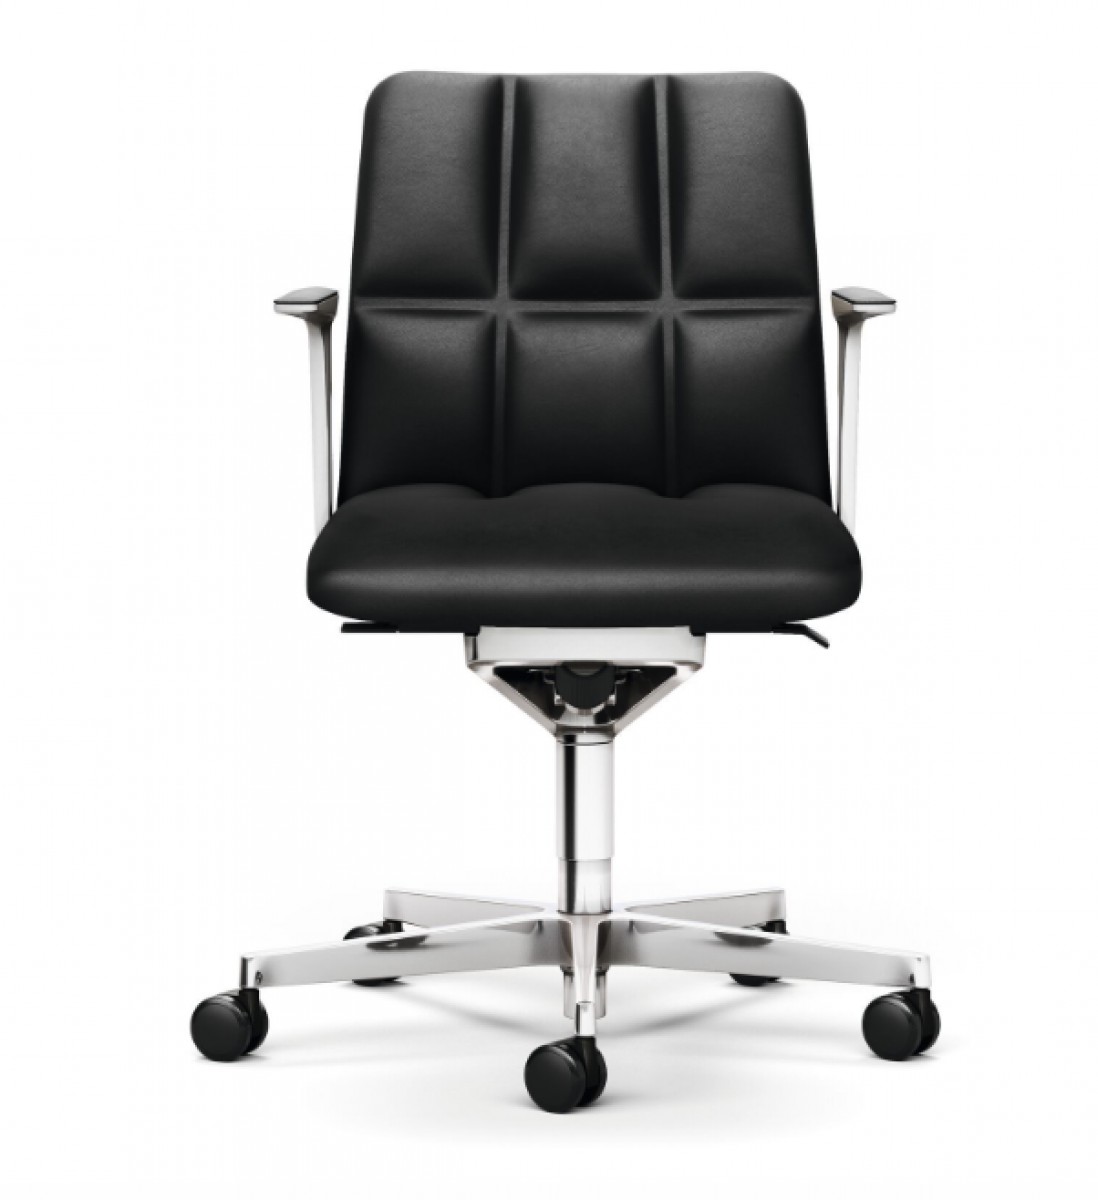 Leadchair Management Swivel Chair, 5-Star Base with Casters and Arm with Leather Pad - Low Back